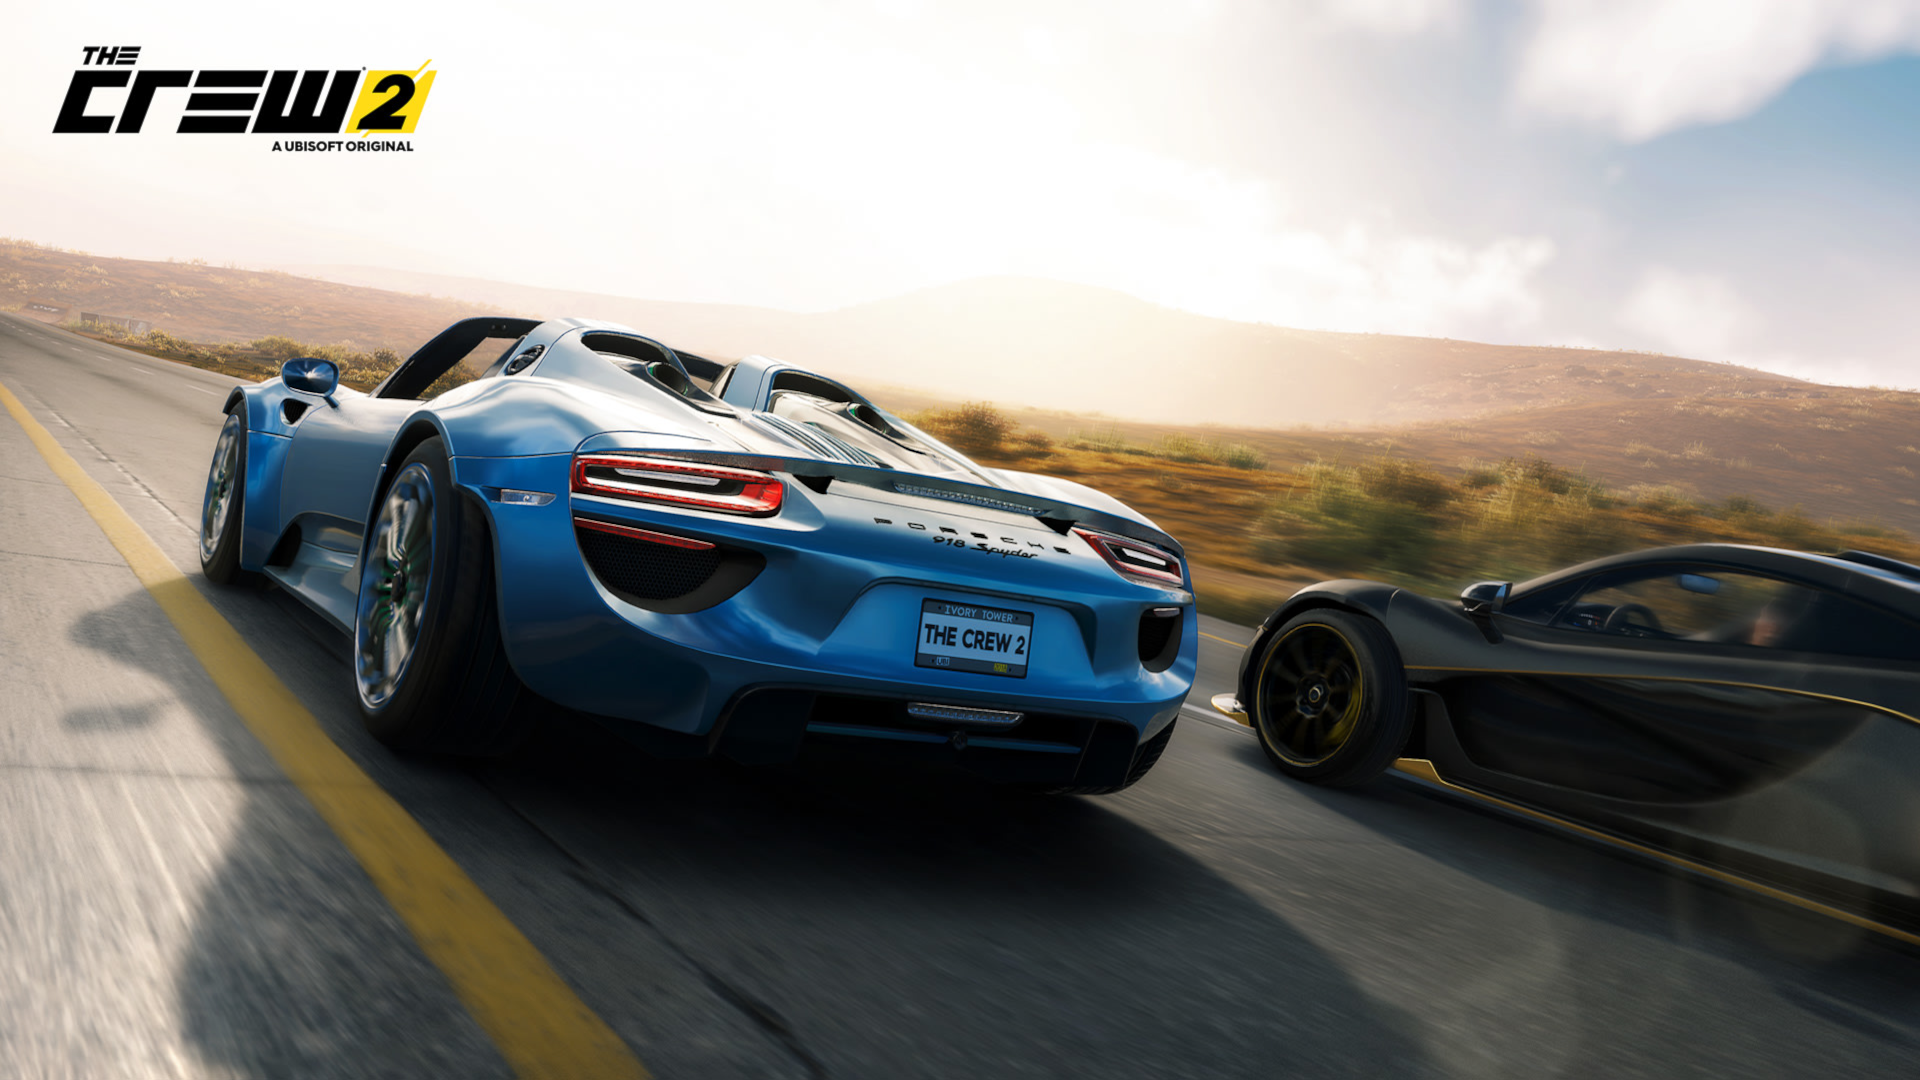 The crew 2 HD wallpapers free download  Wallpaperbetter